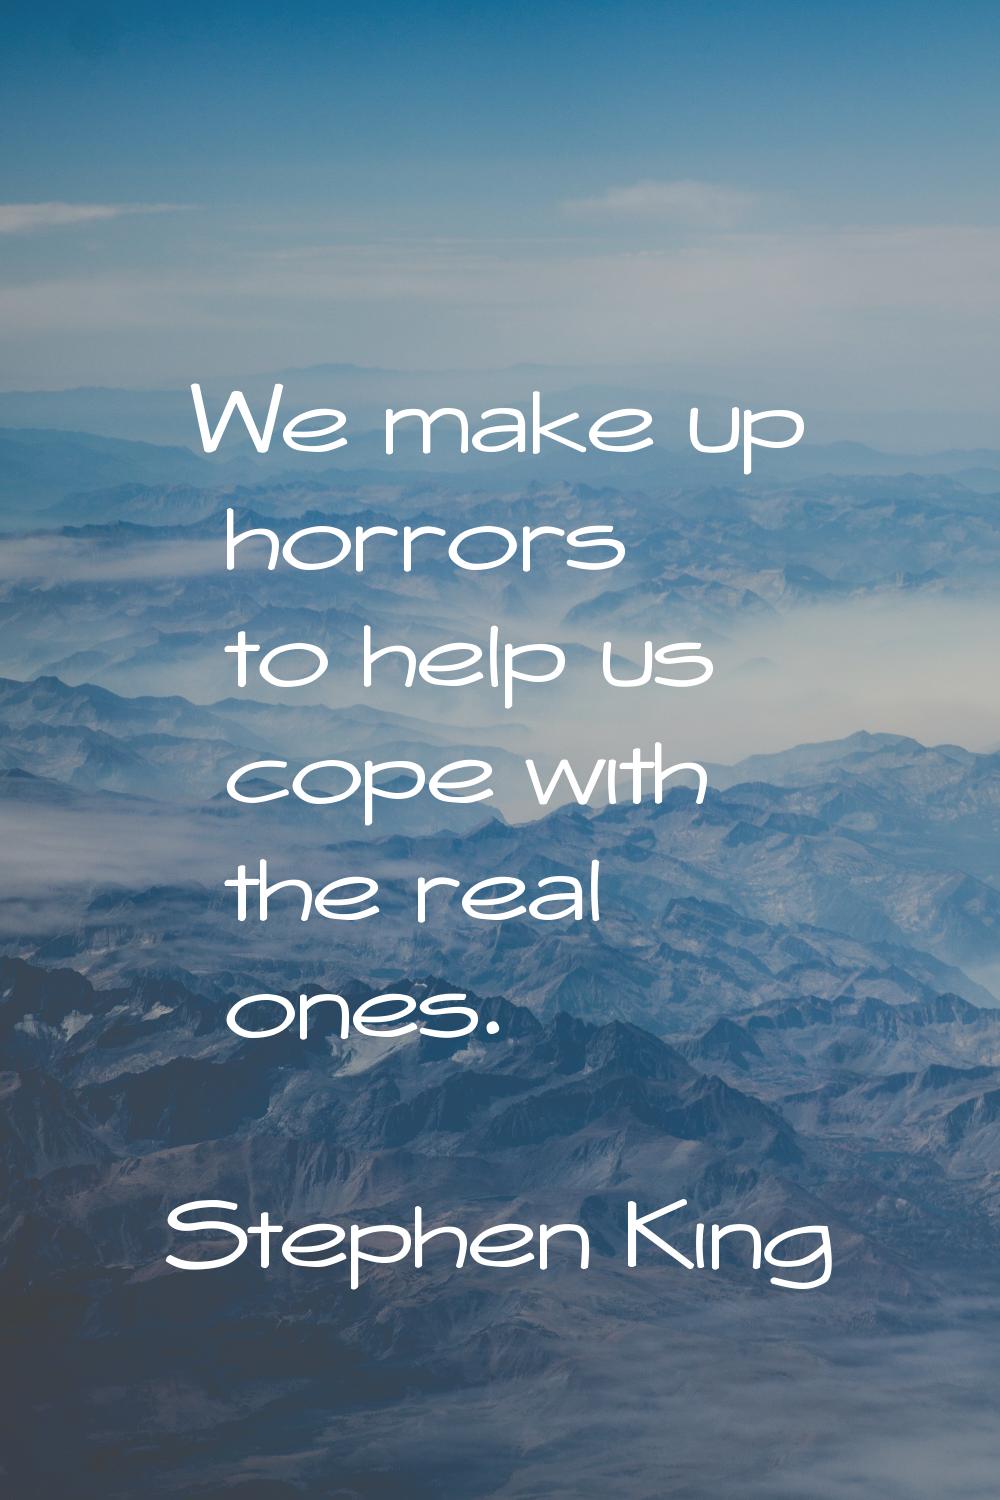 We make up horrors to help us cope with the real ones.